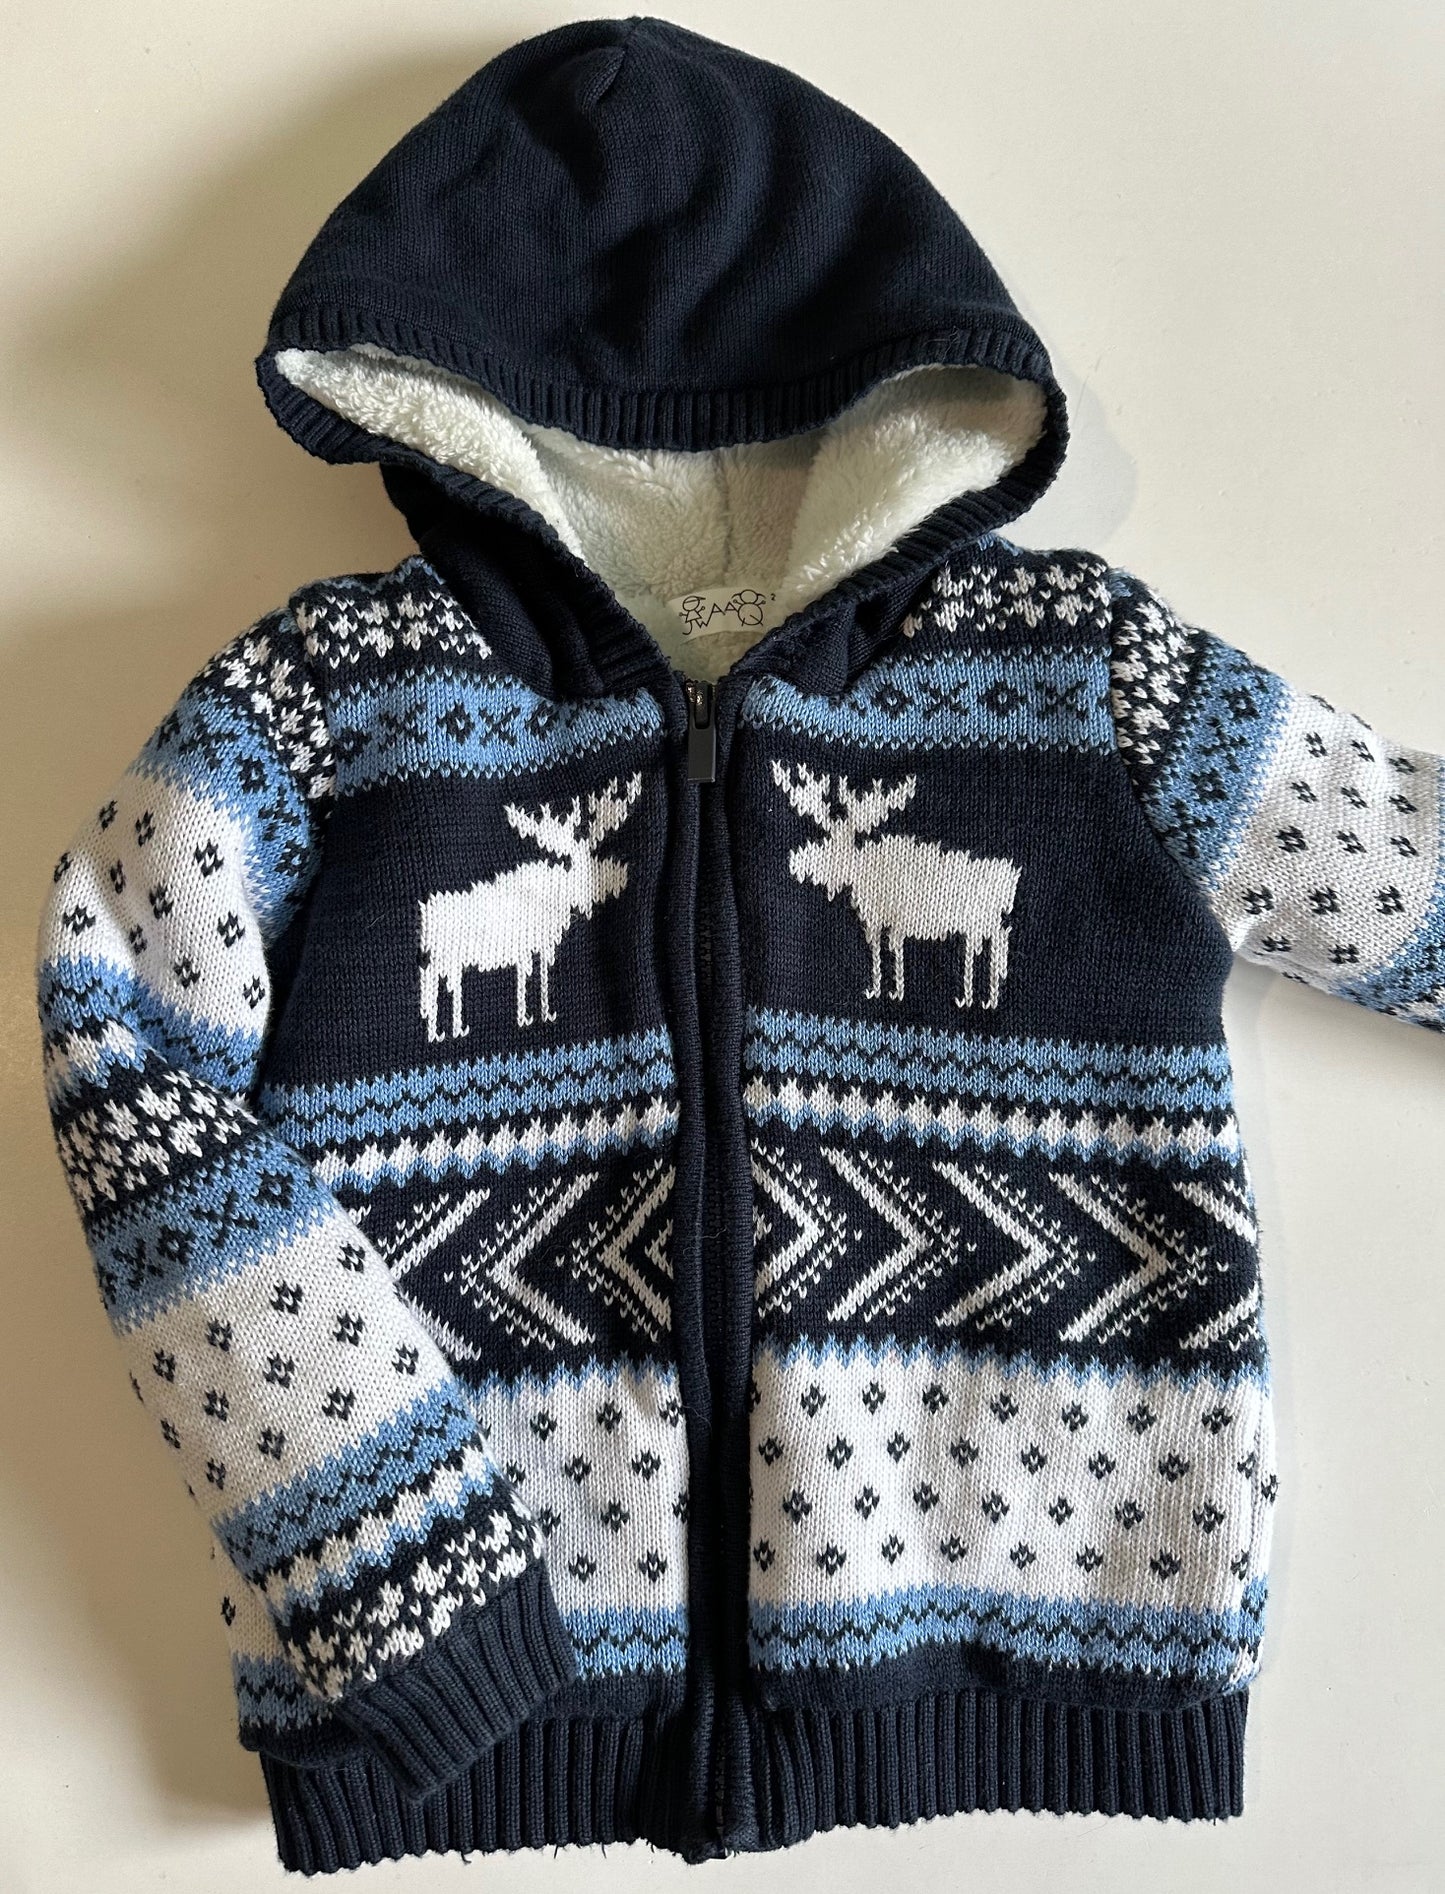 Unknown Brand, Blue and White Cozy-Lined Zip-Up Hooded Sweater - 24 Months